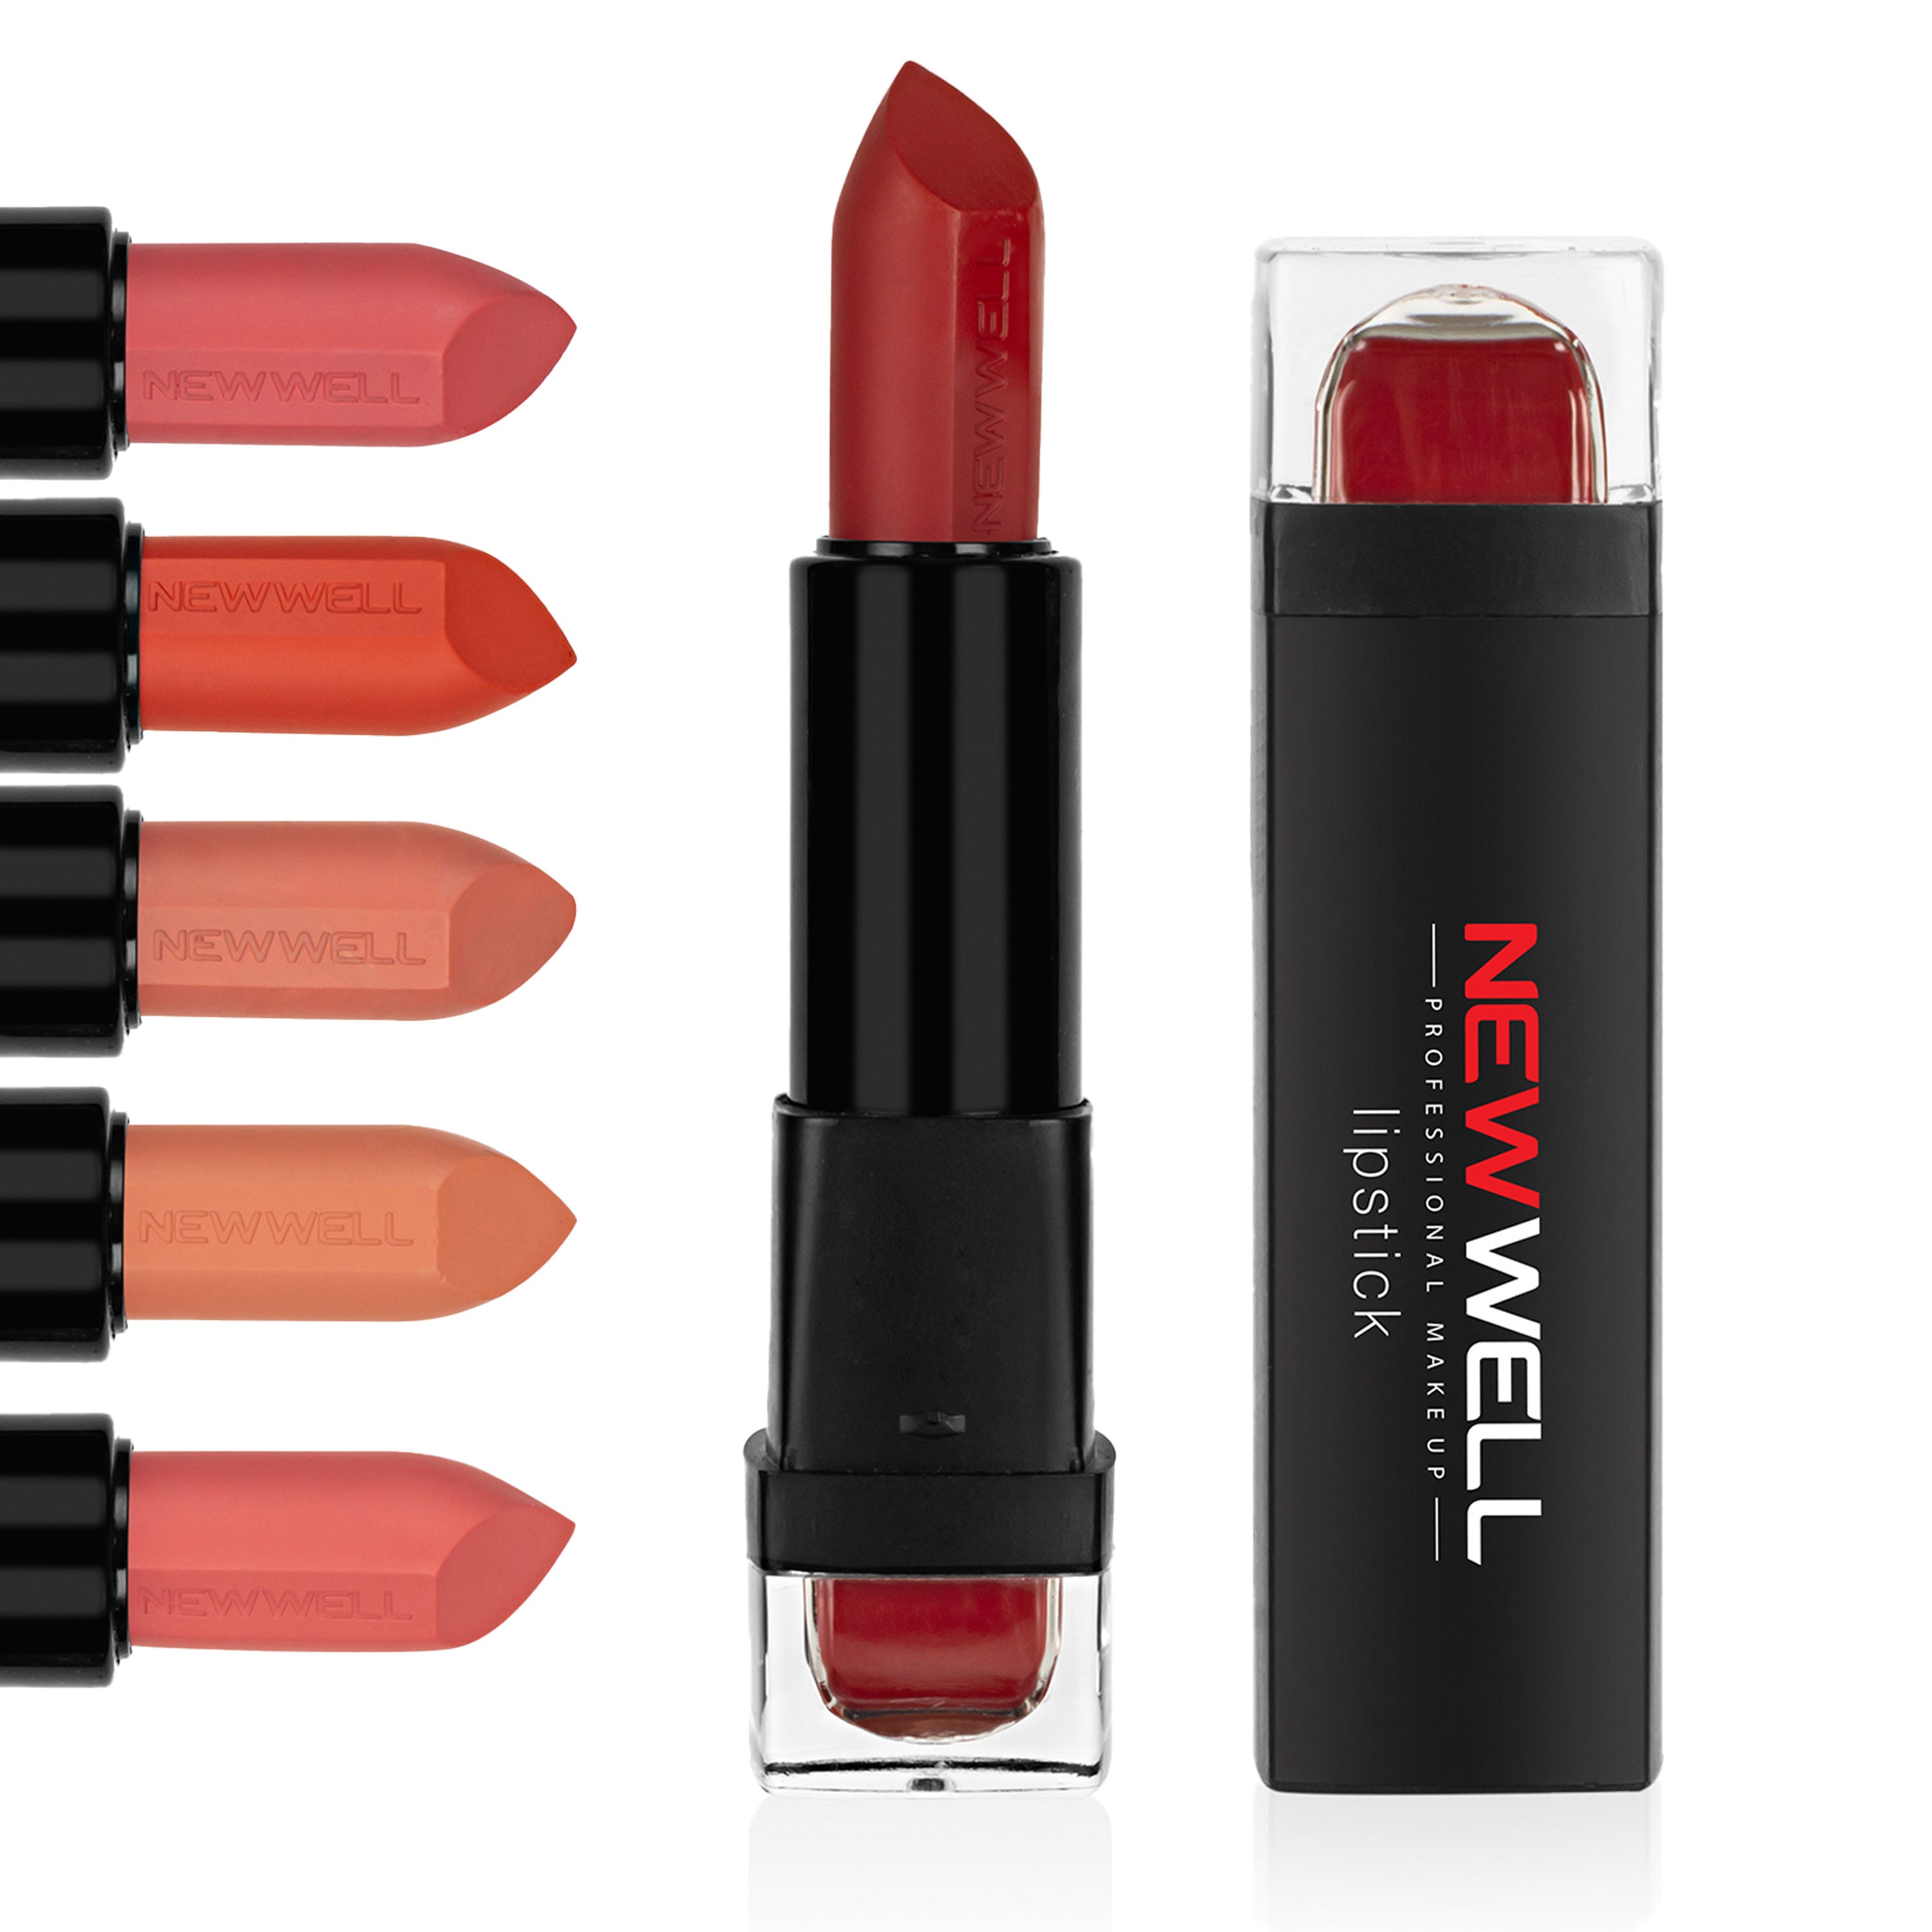 NEWWELL Matte Lipstick in 6 colors